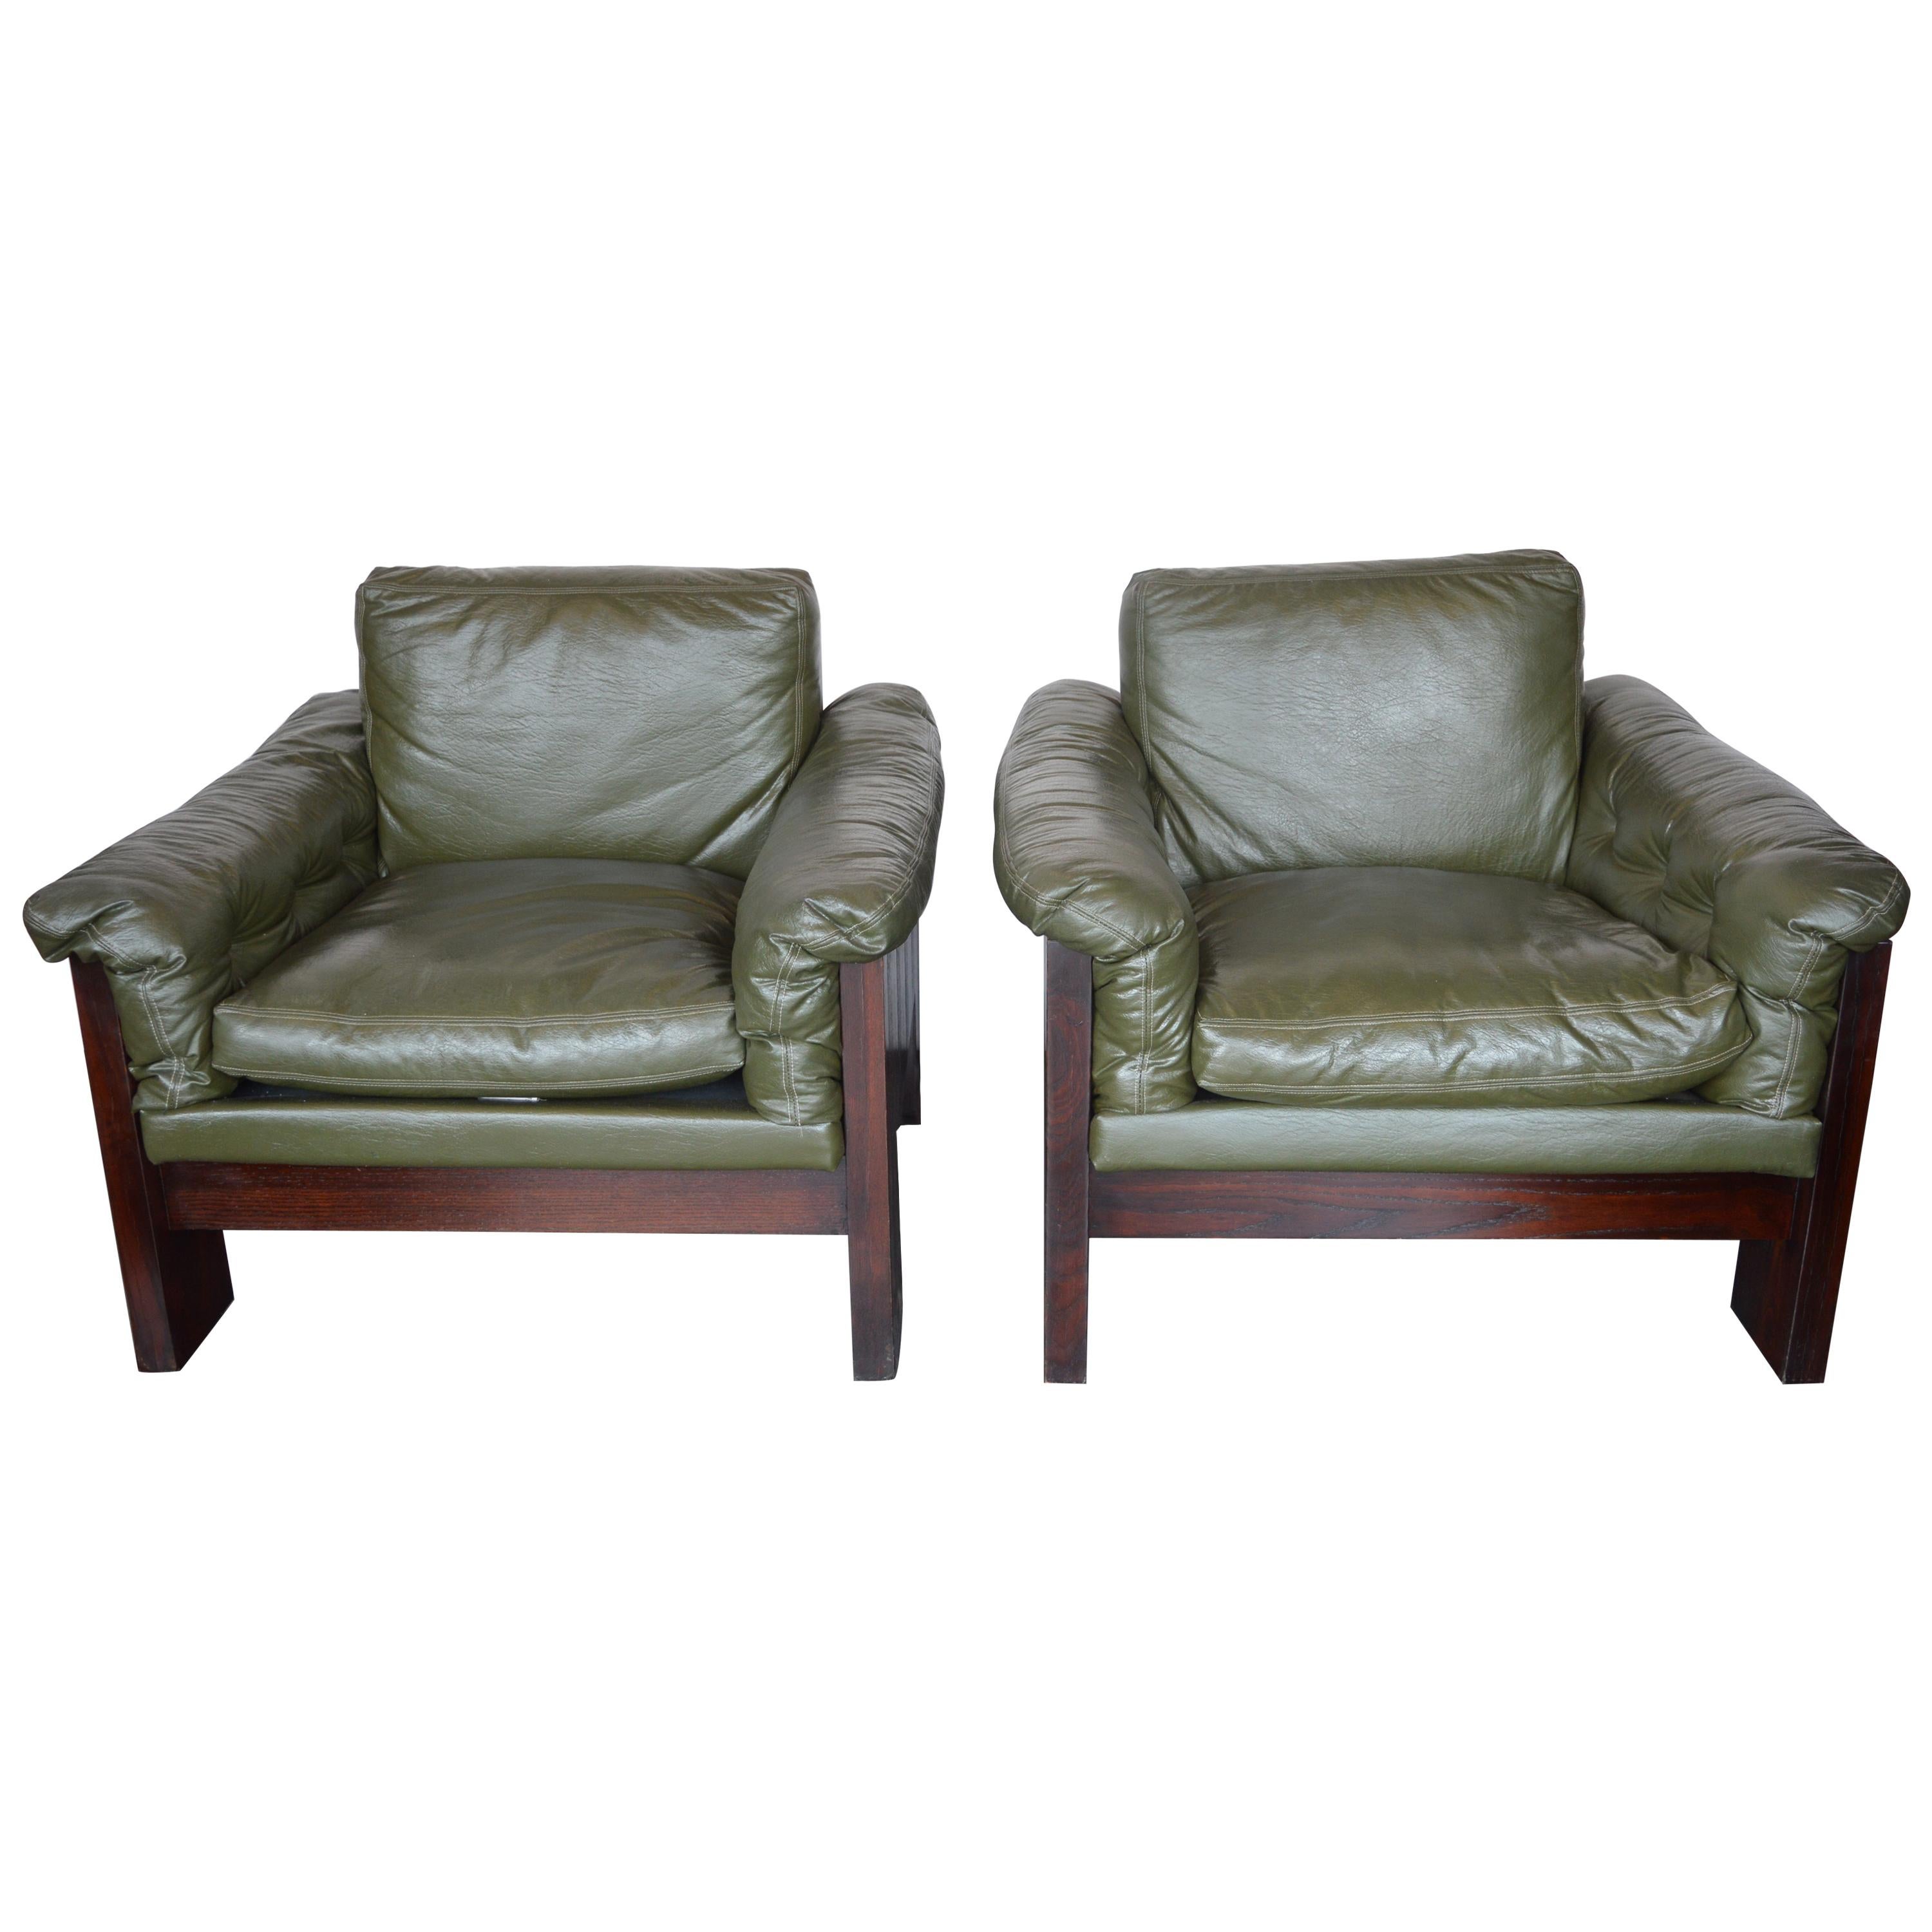 Pair of Green Leather Armchairs Milo Baughman for Thayer Coggin